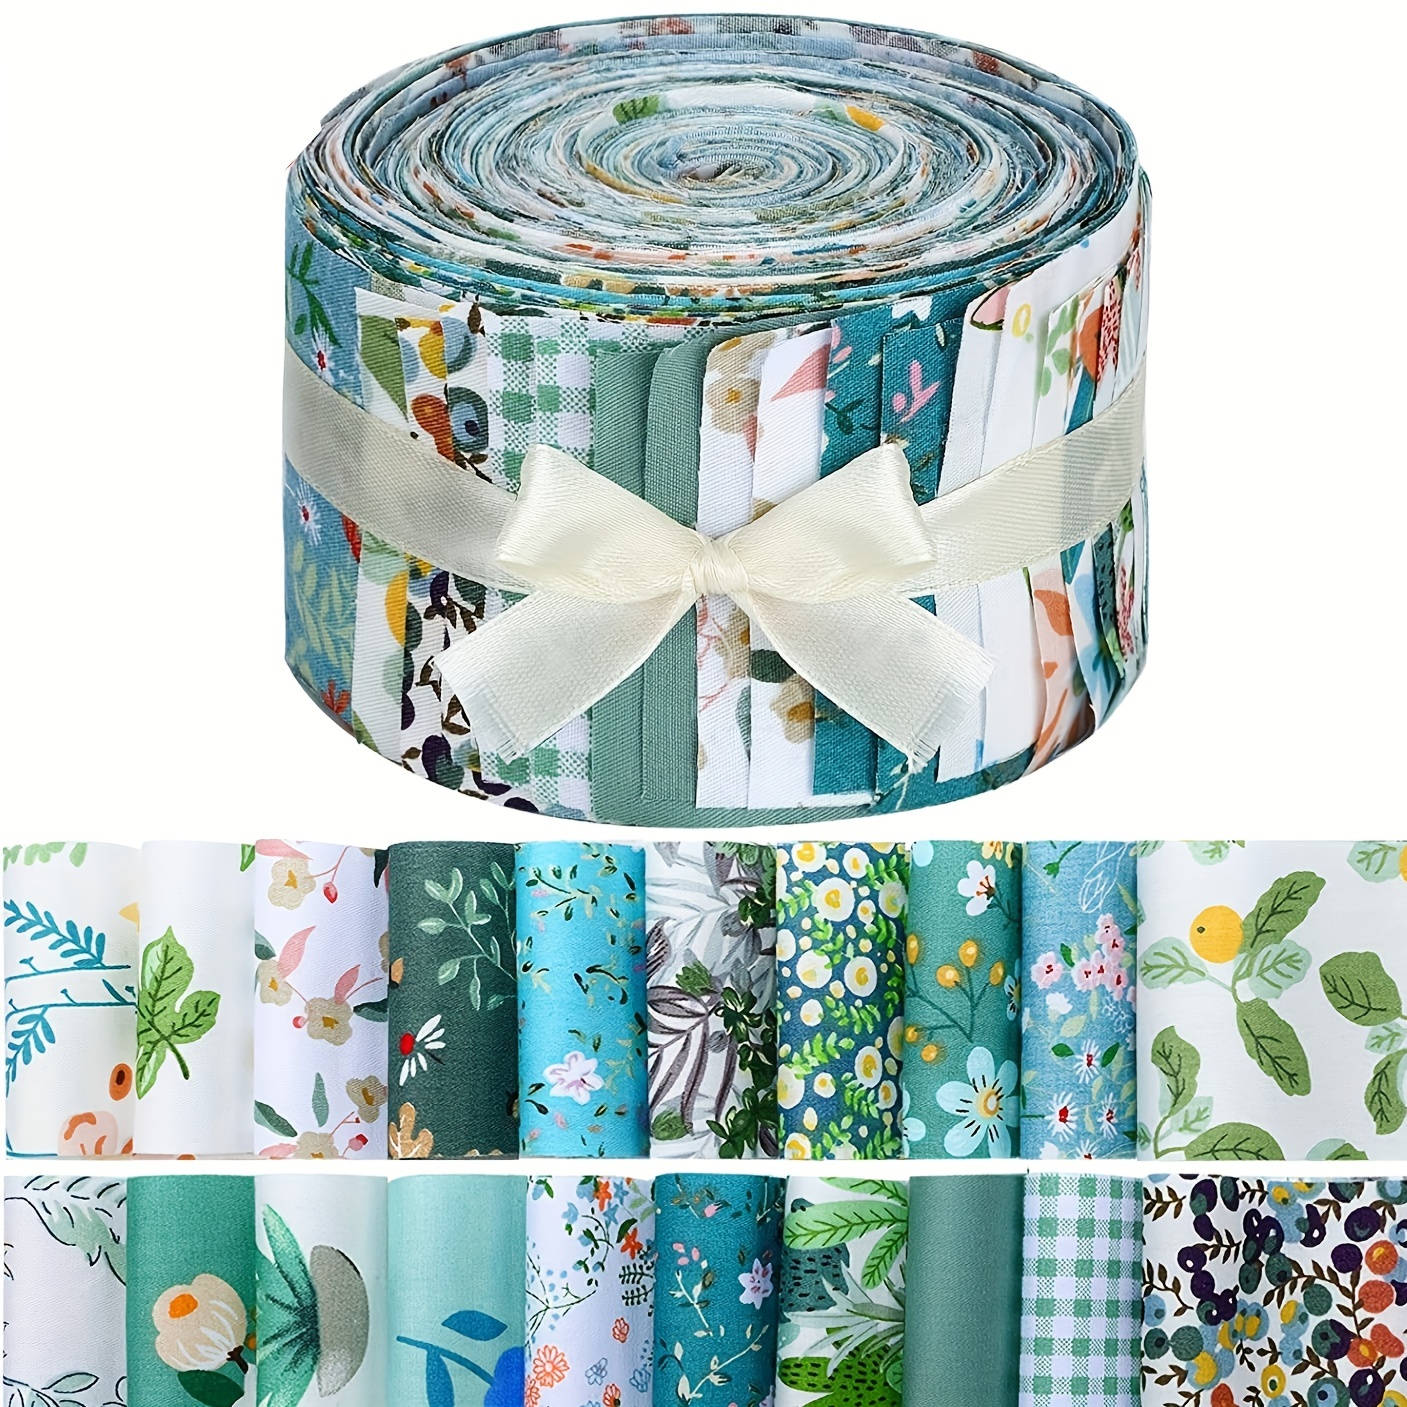 Full sized and Precut Quilting Fabric Clearance, Discounts